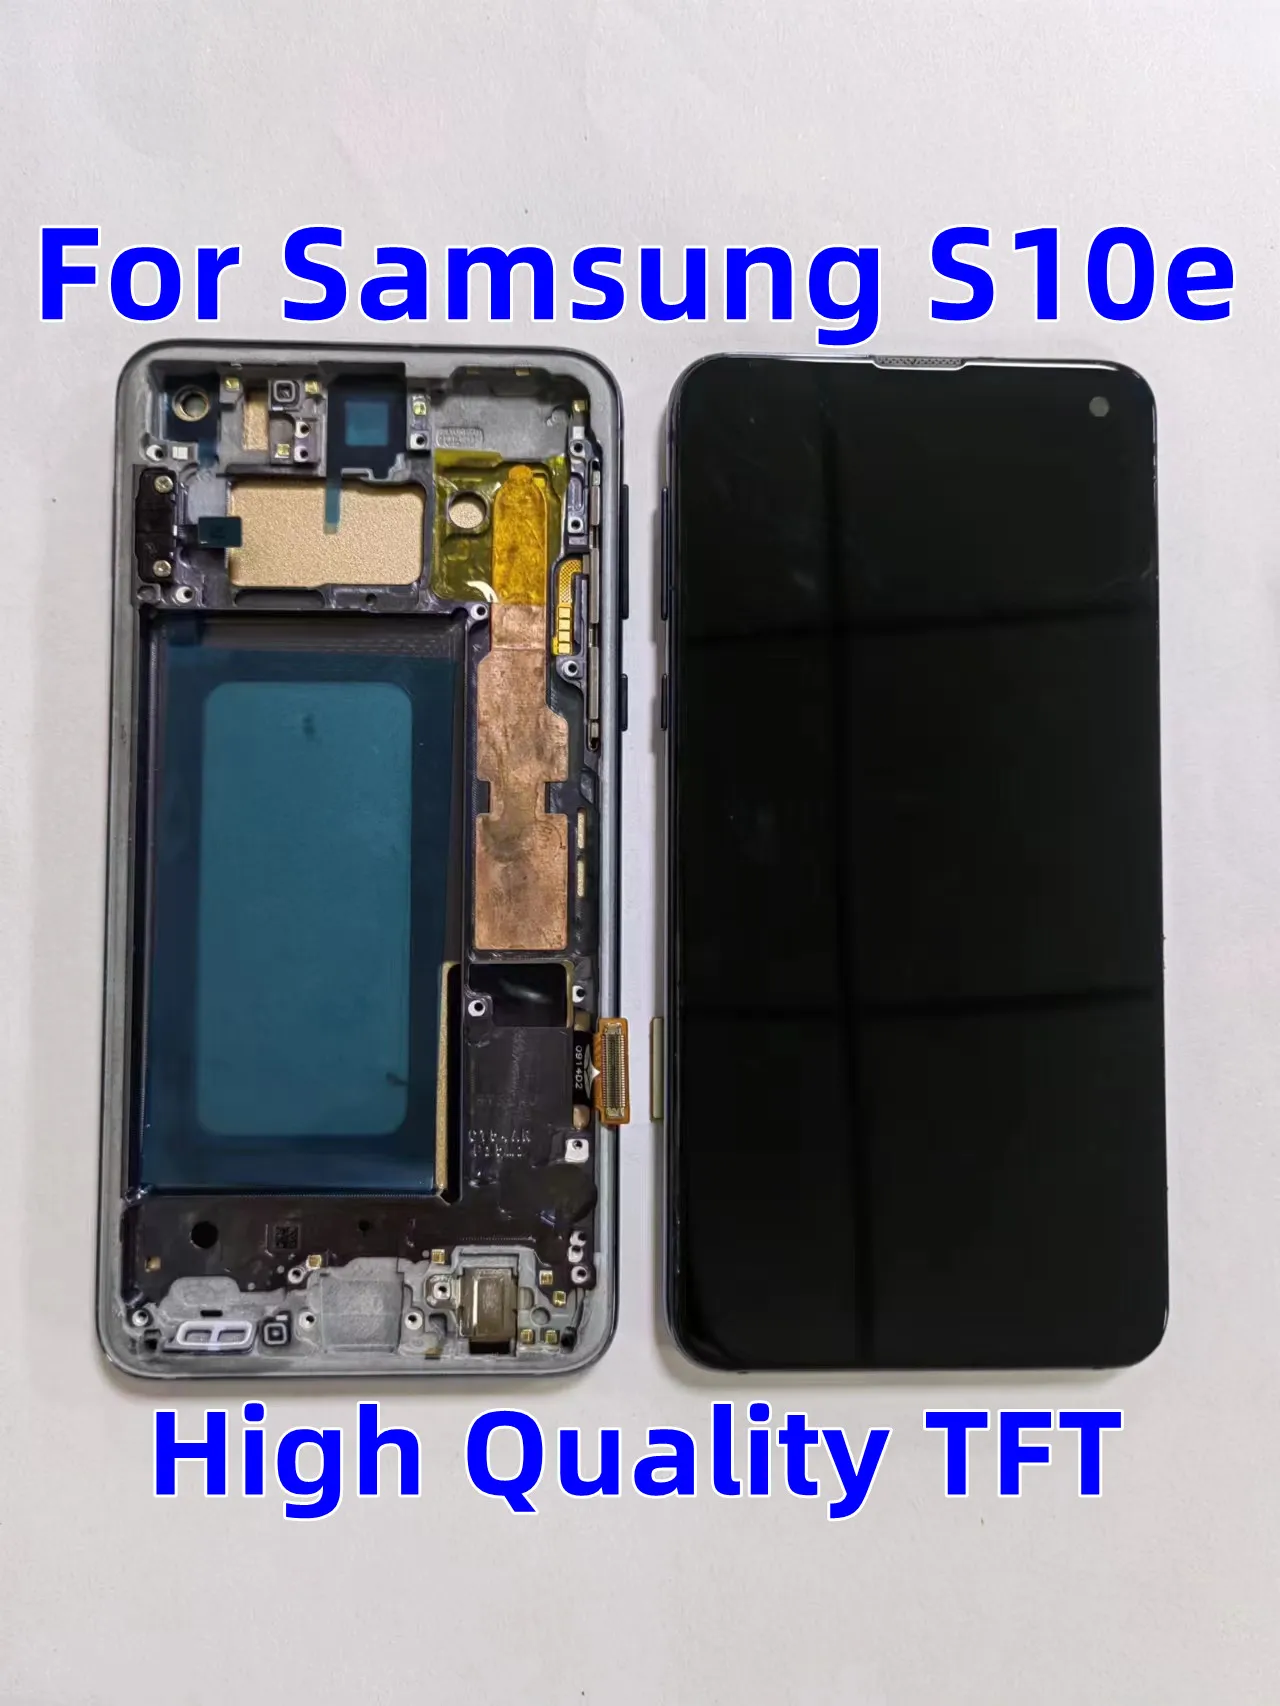 High Quality TFT For Samsung Galaxy S10e G970F G970U Display Touch ScreenDigitizer Assembly with Frame,Face recognition